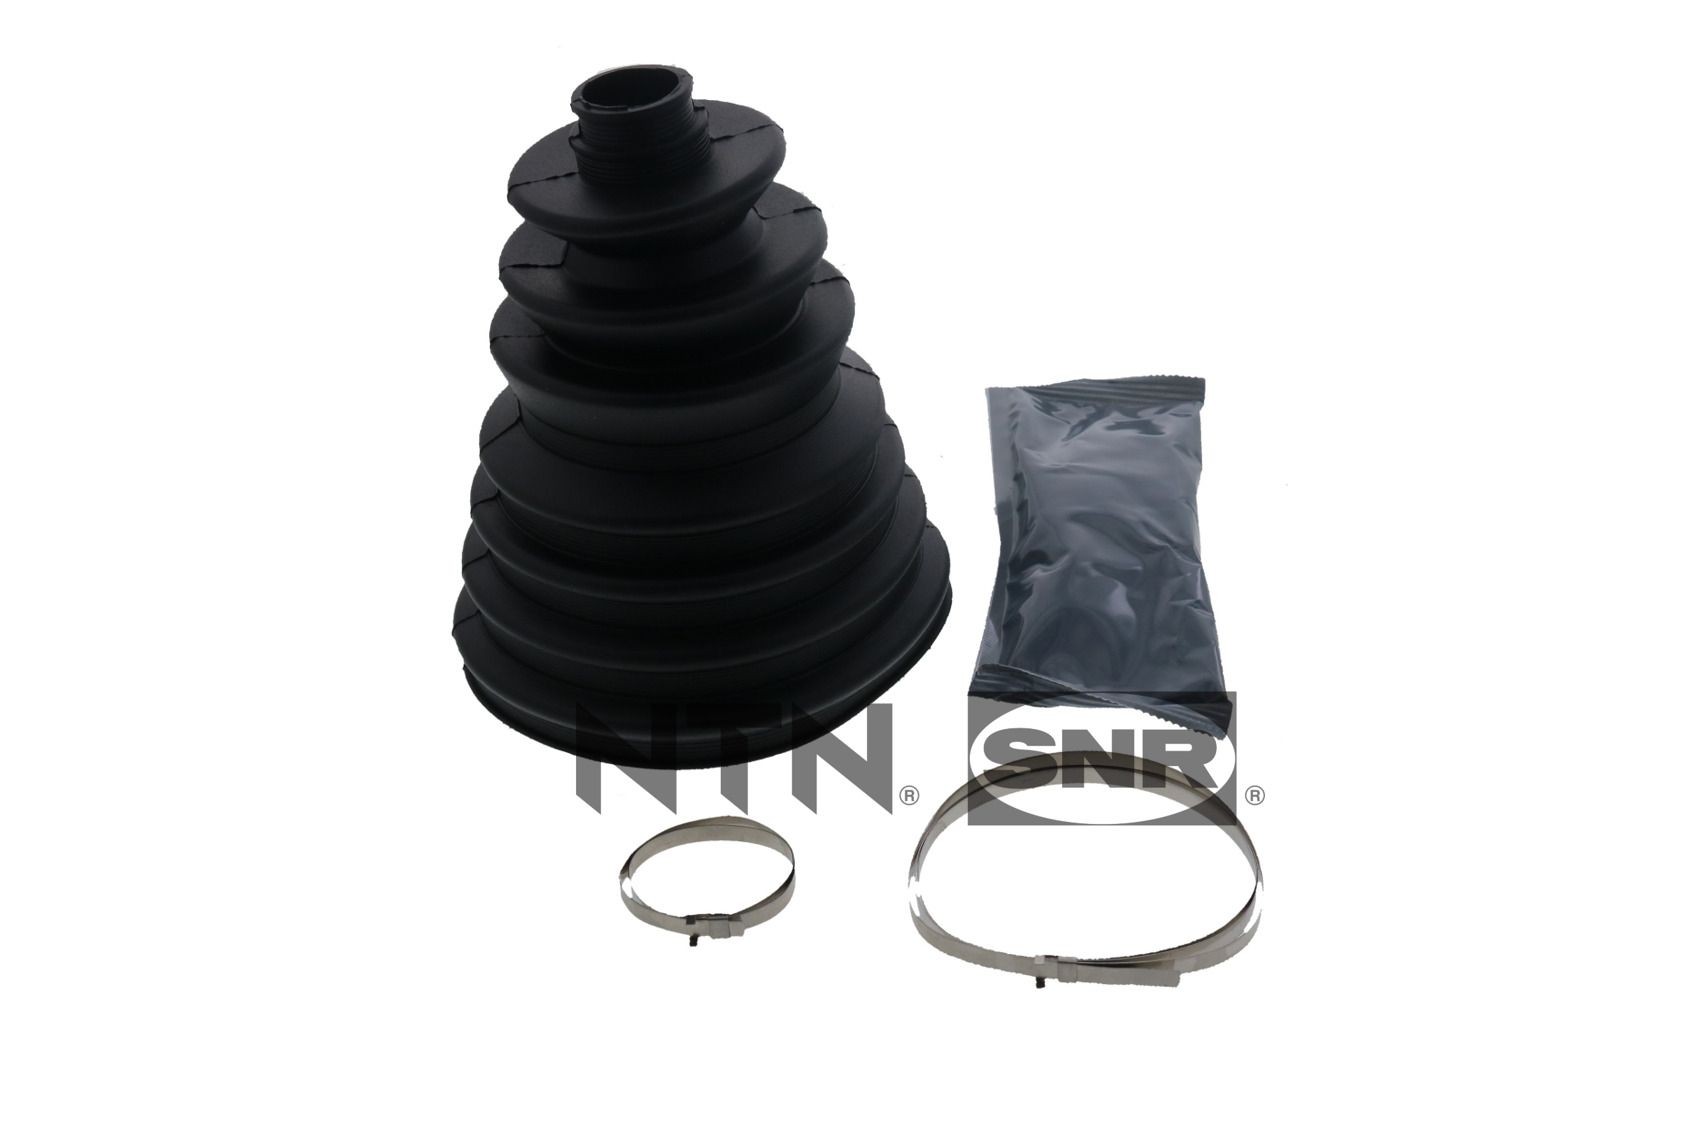 Volvo Drive shaft and cv joint parts - Bellow Set, drive shaft SNR OBK10.002